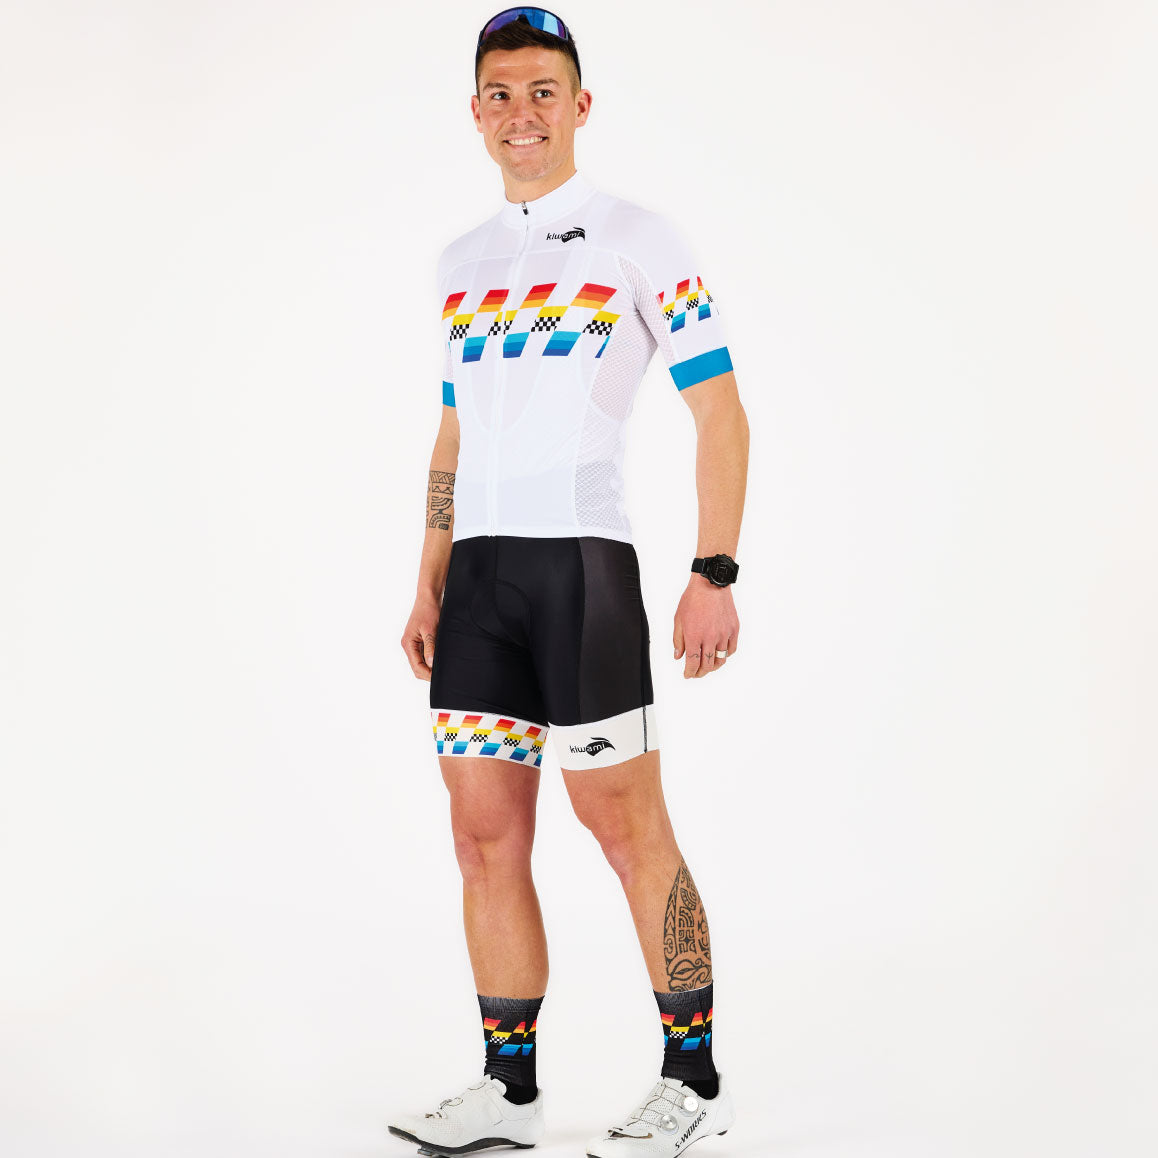 MEN'S CYCLING JERSEY FINISHER WHITE